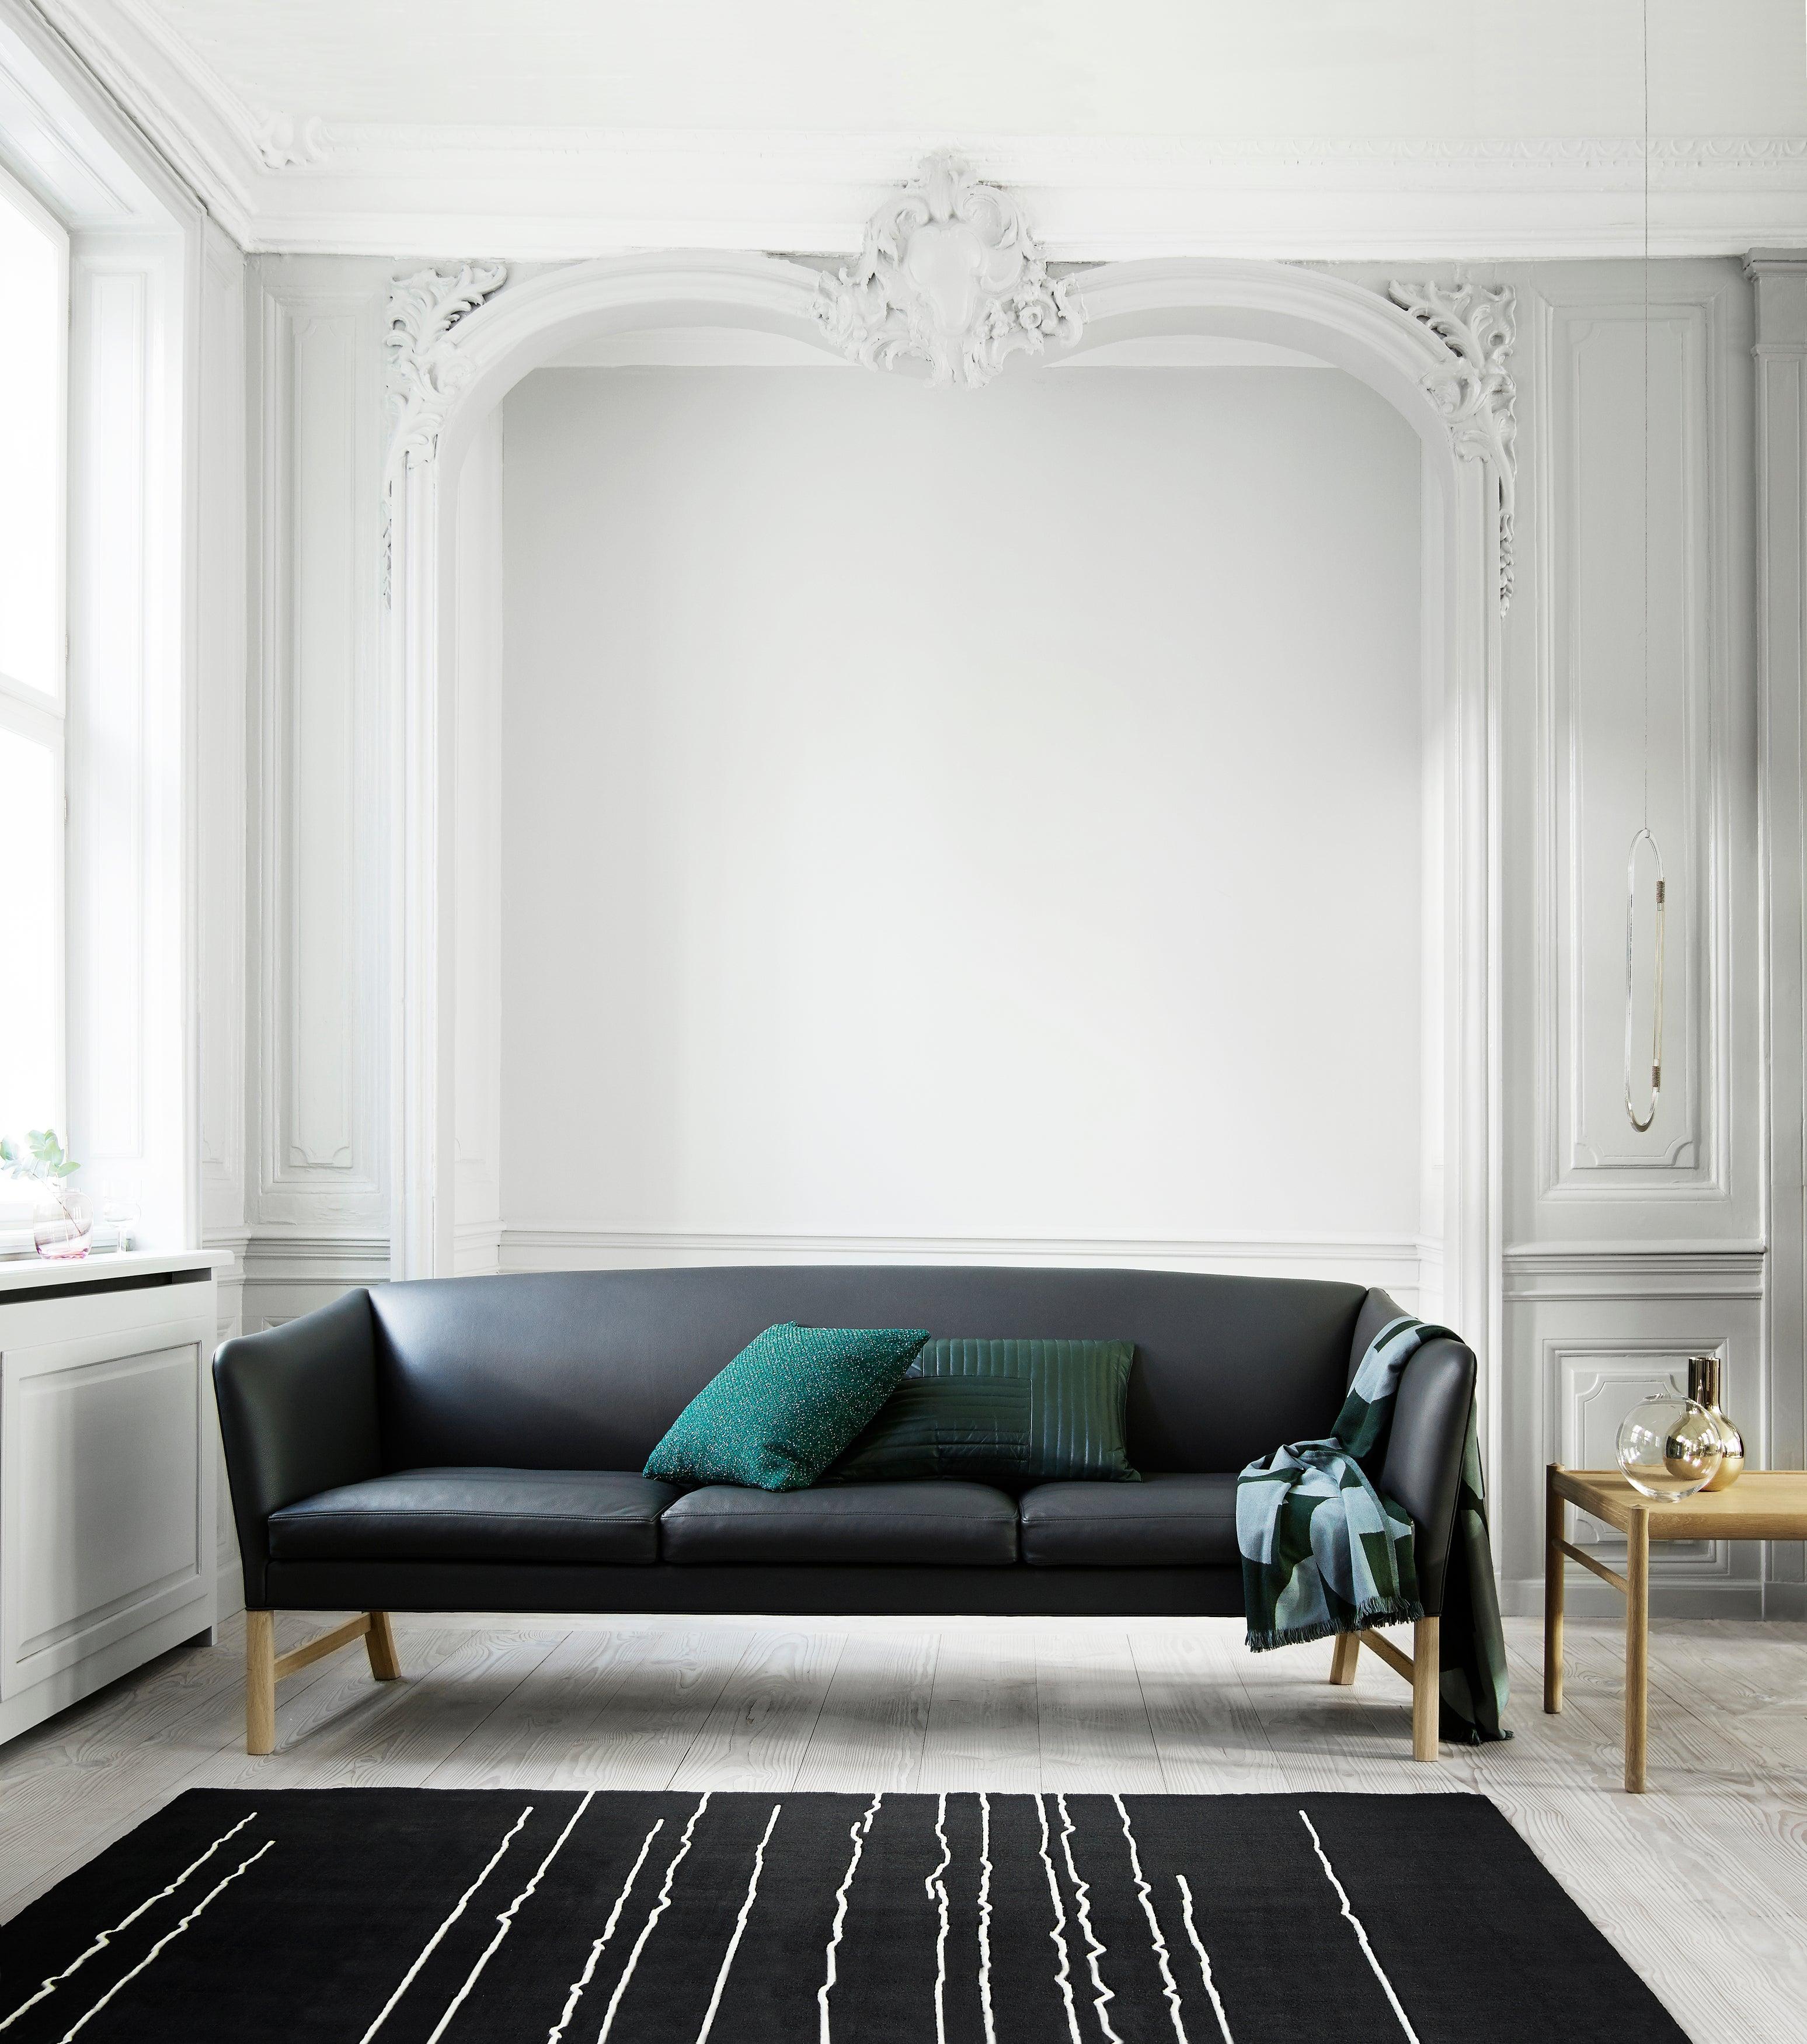 The OW603 sofa by Ole Wanscher is a classic and luxurious three-seat sofa ideal for larger modern interiors. This masterpiece from 1960 was inspired by classic English and Oriental furniture and forms part of a complete living room set designed by